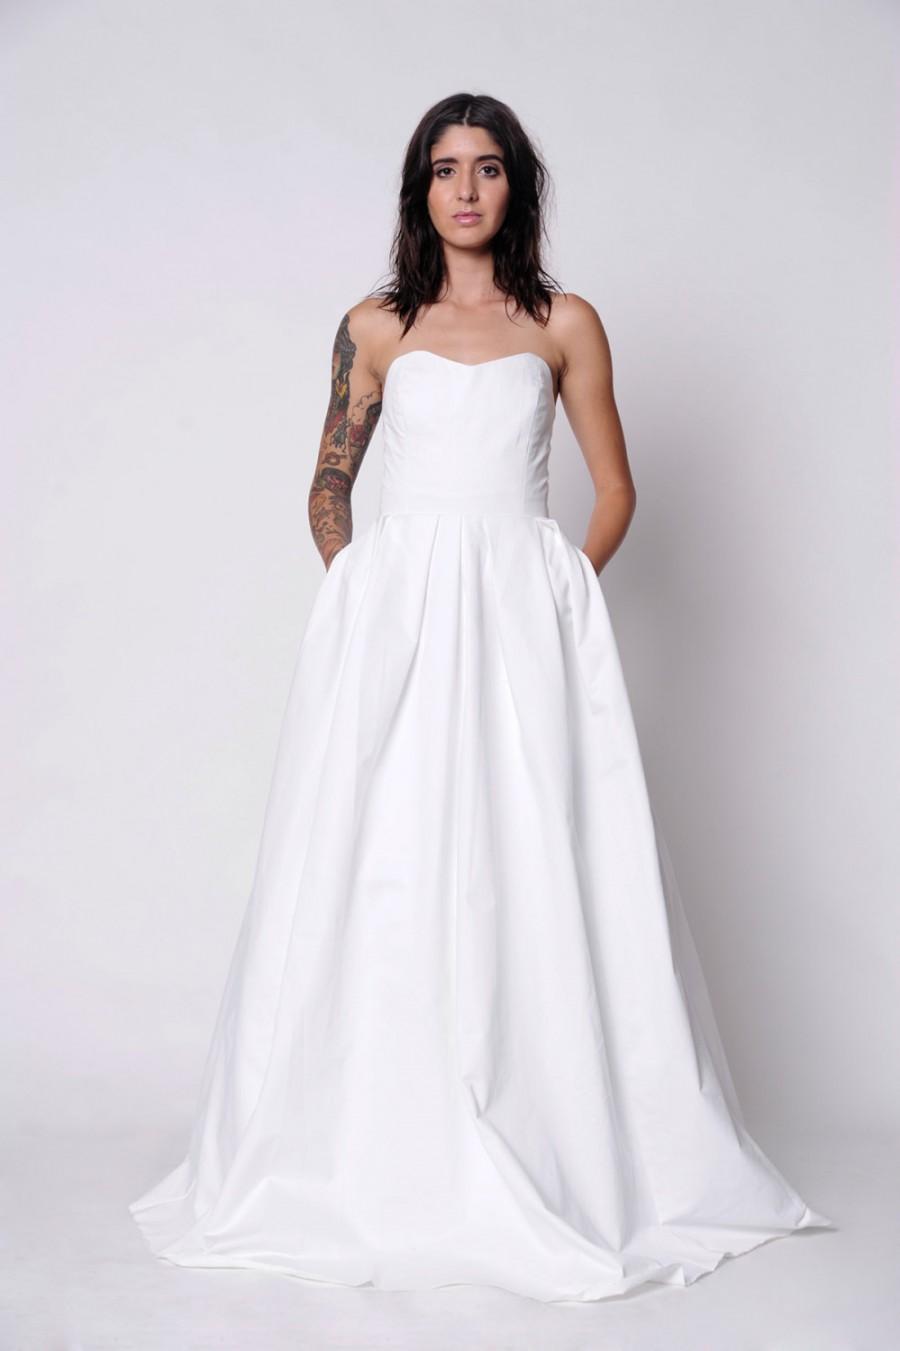 Mariage - Wedding Gown with Pockets. Midnight Skies Wedding Gown. Strapless Gown with Pleated Skirt and Button Detail. Custom Made to Order.